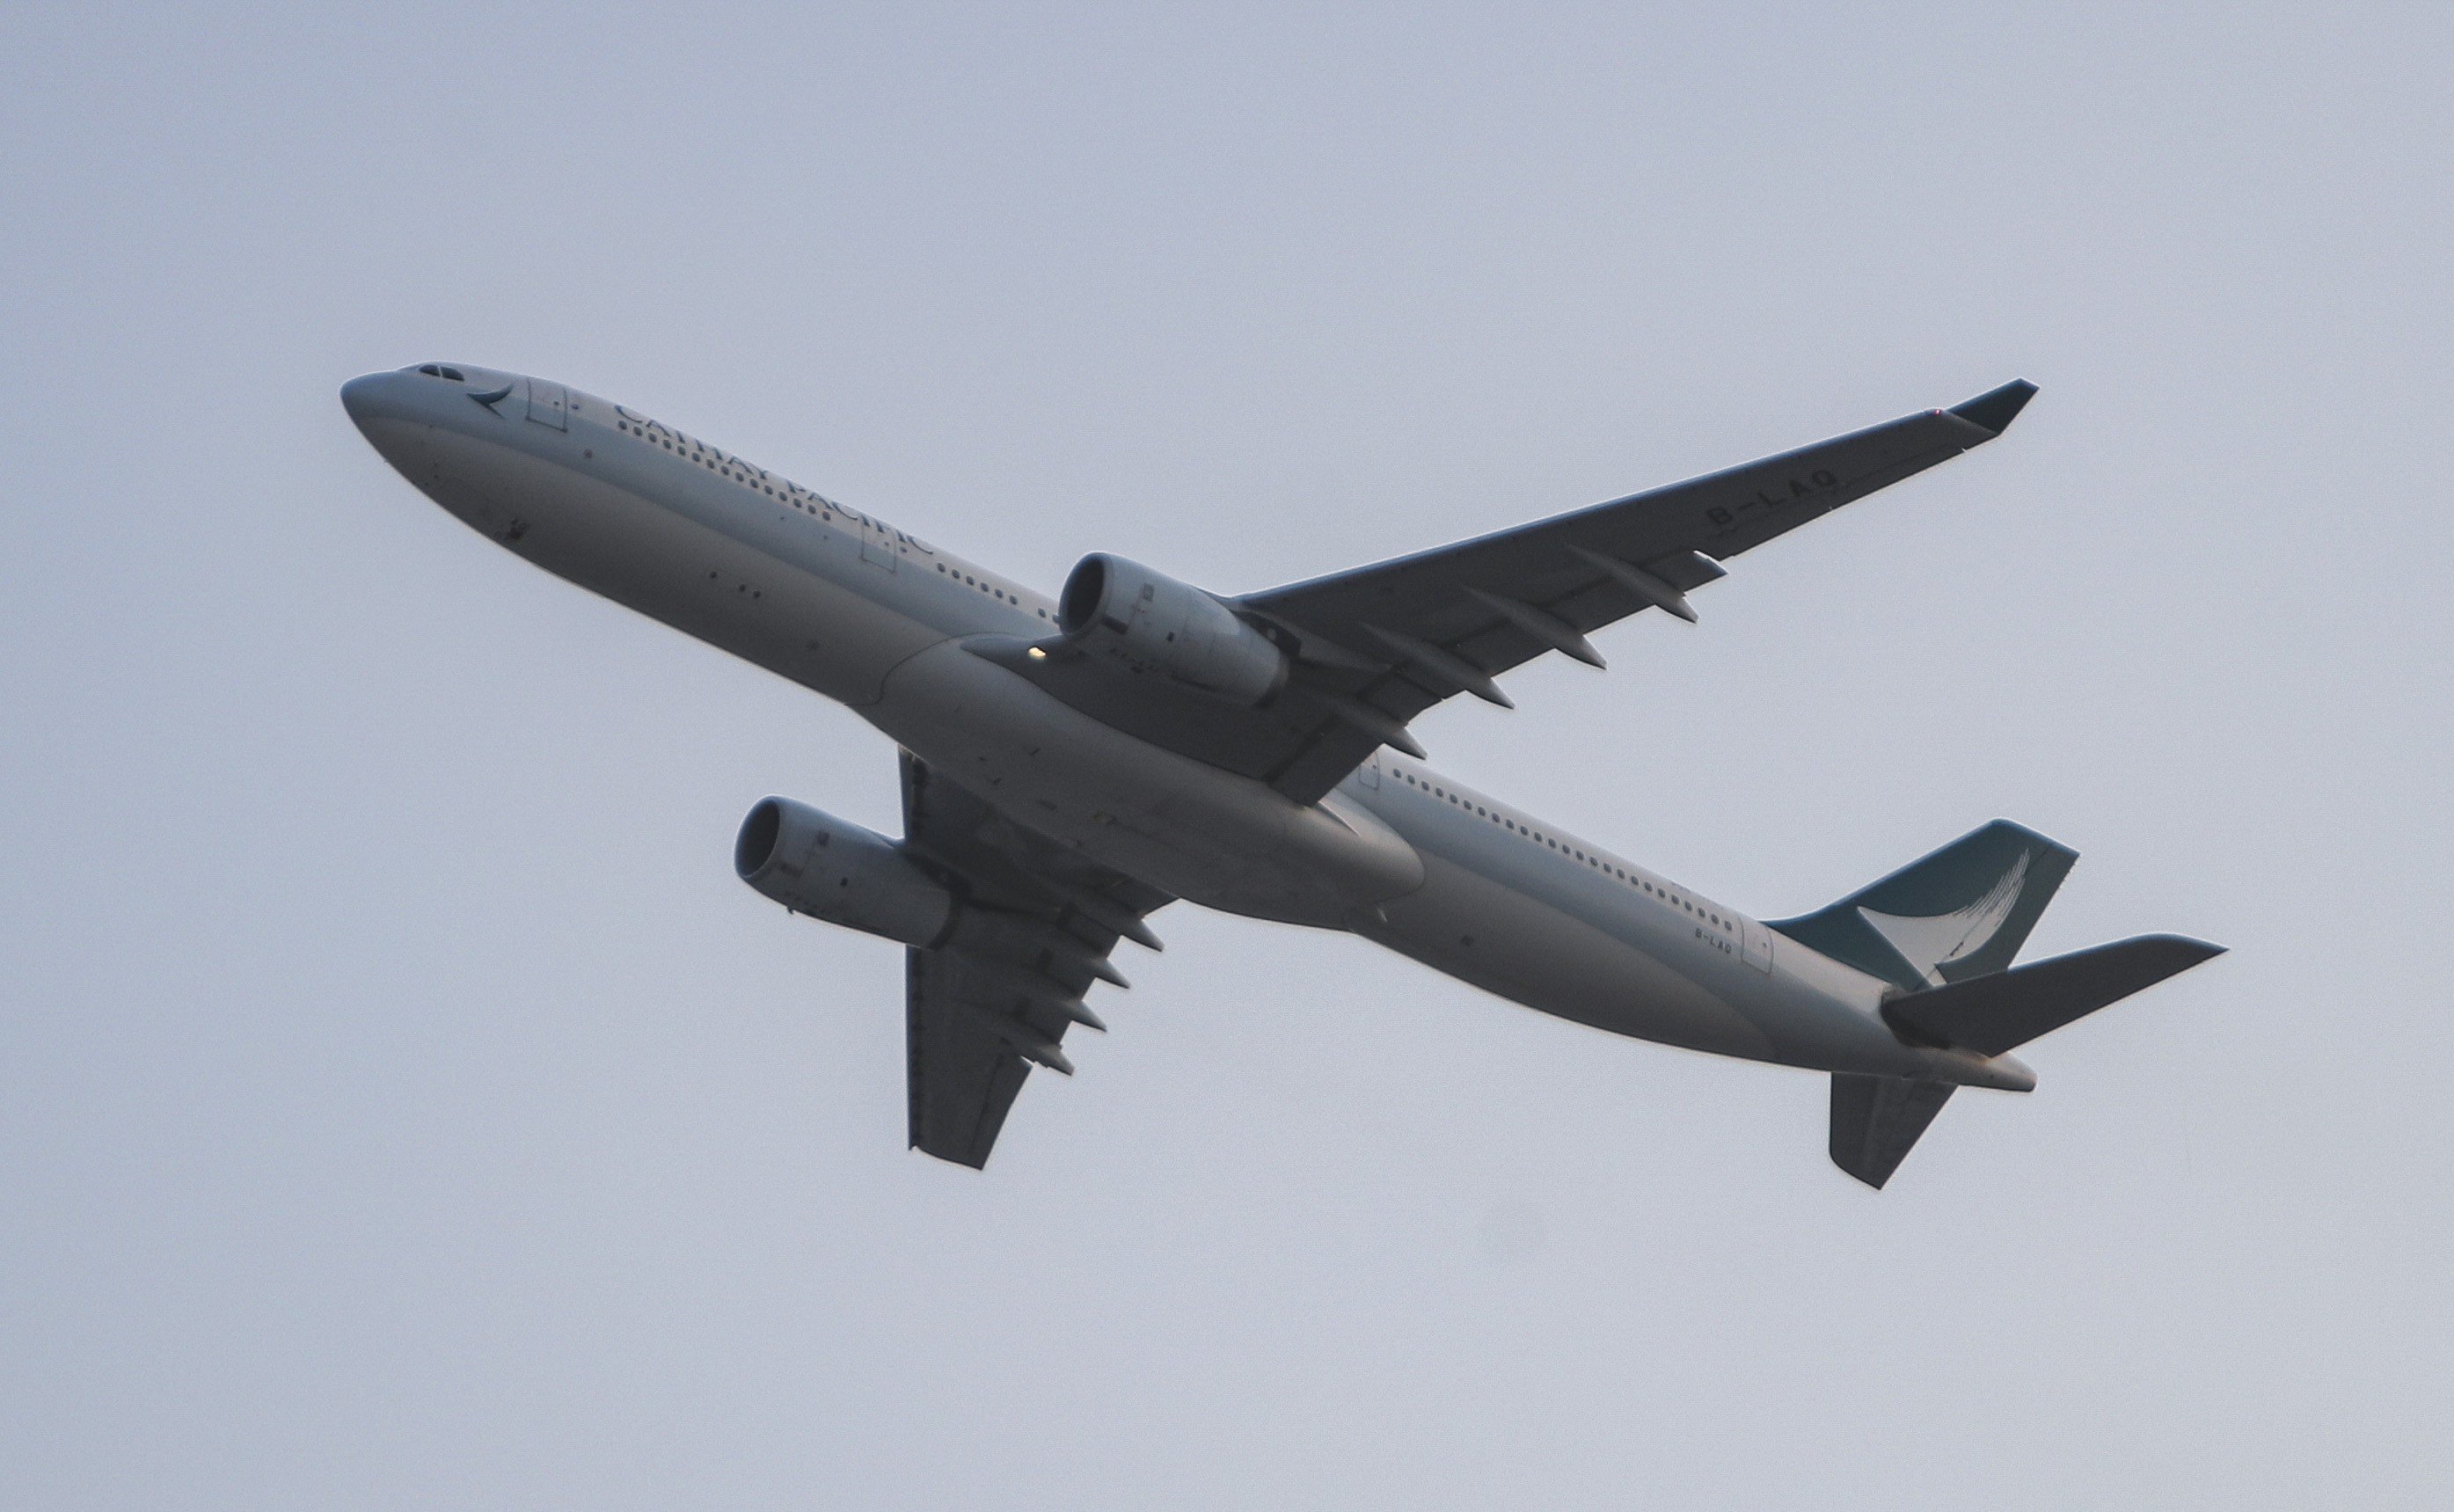 Cathay Pacific said on Thursday its daily Hong Kong-Dubai service had to be diverted south, resulting in minor delays to arrivals. Photo: Winson Wong